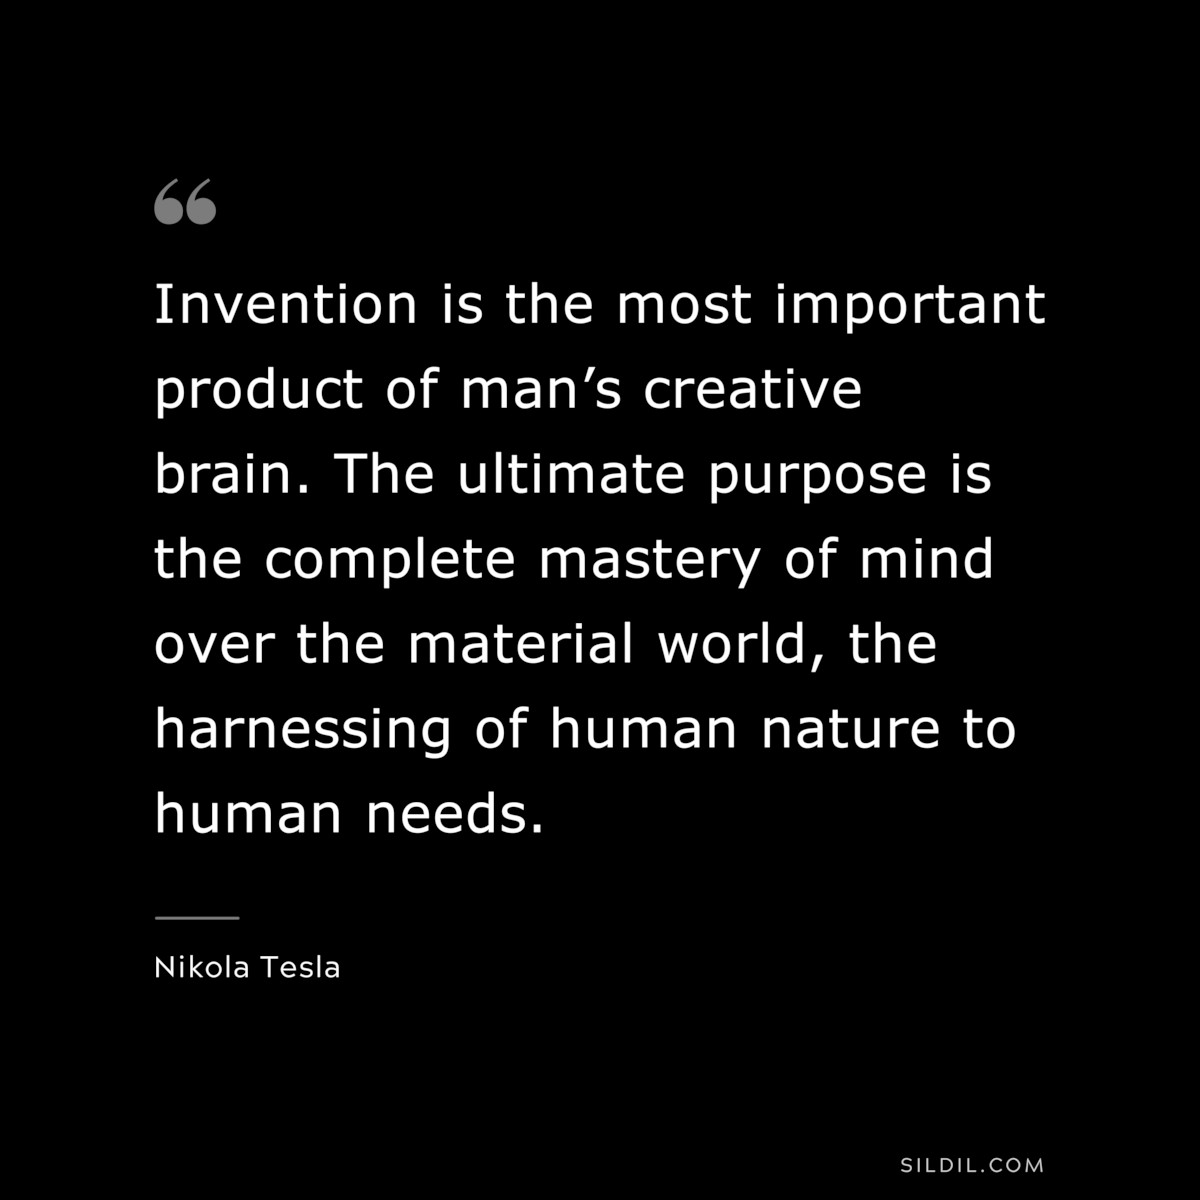 Invention is the most important product of man’s creative brain. The ultimate purpose is the complete mastery of mind over the material world, the harnessing of human nature to human needs. ― Nikola Tesla